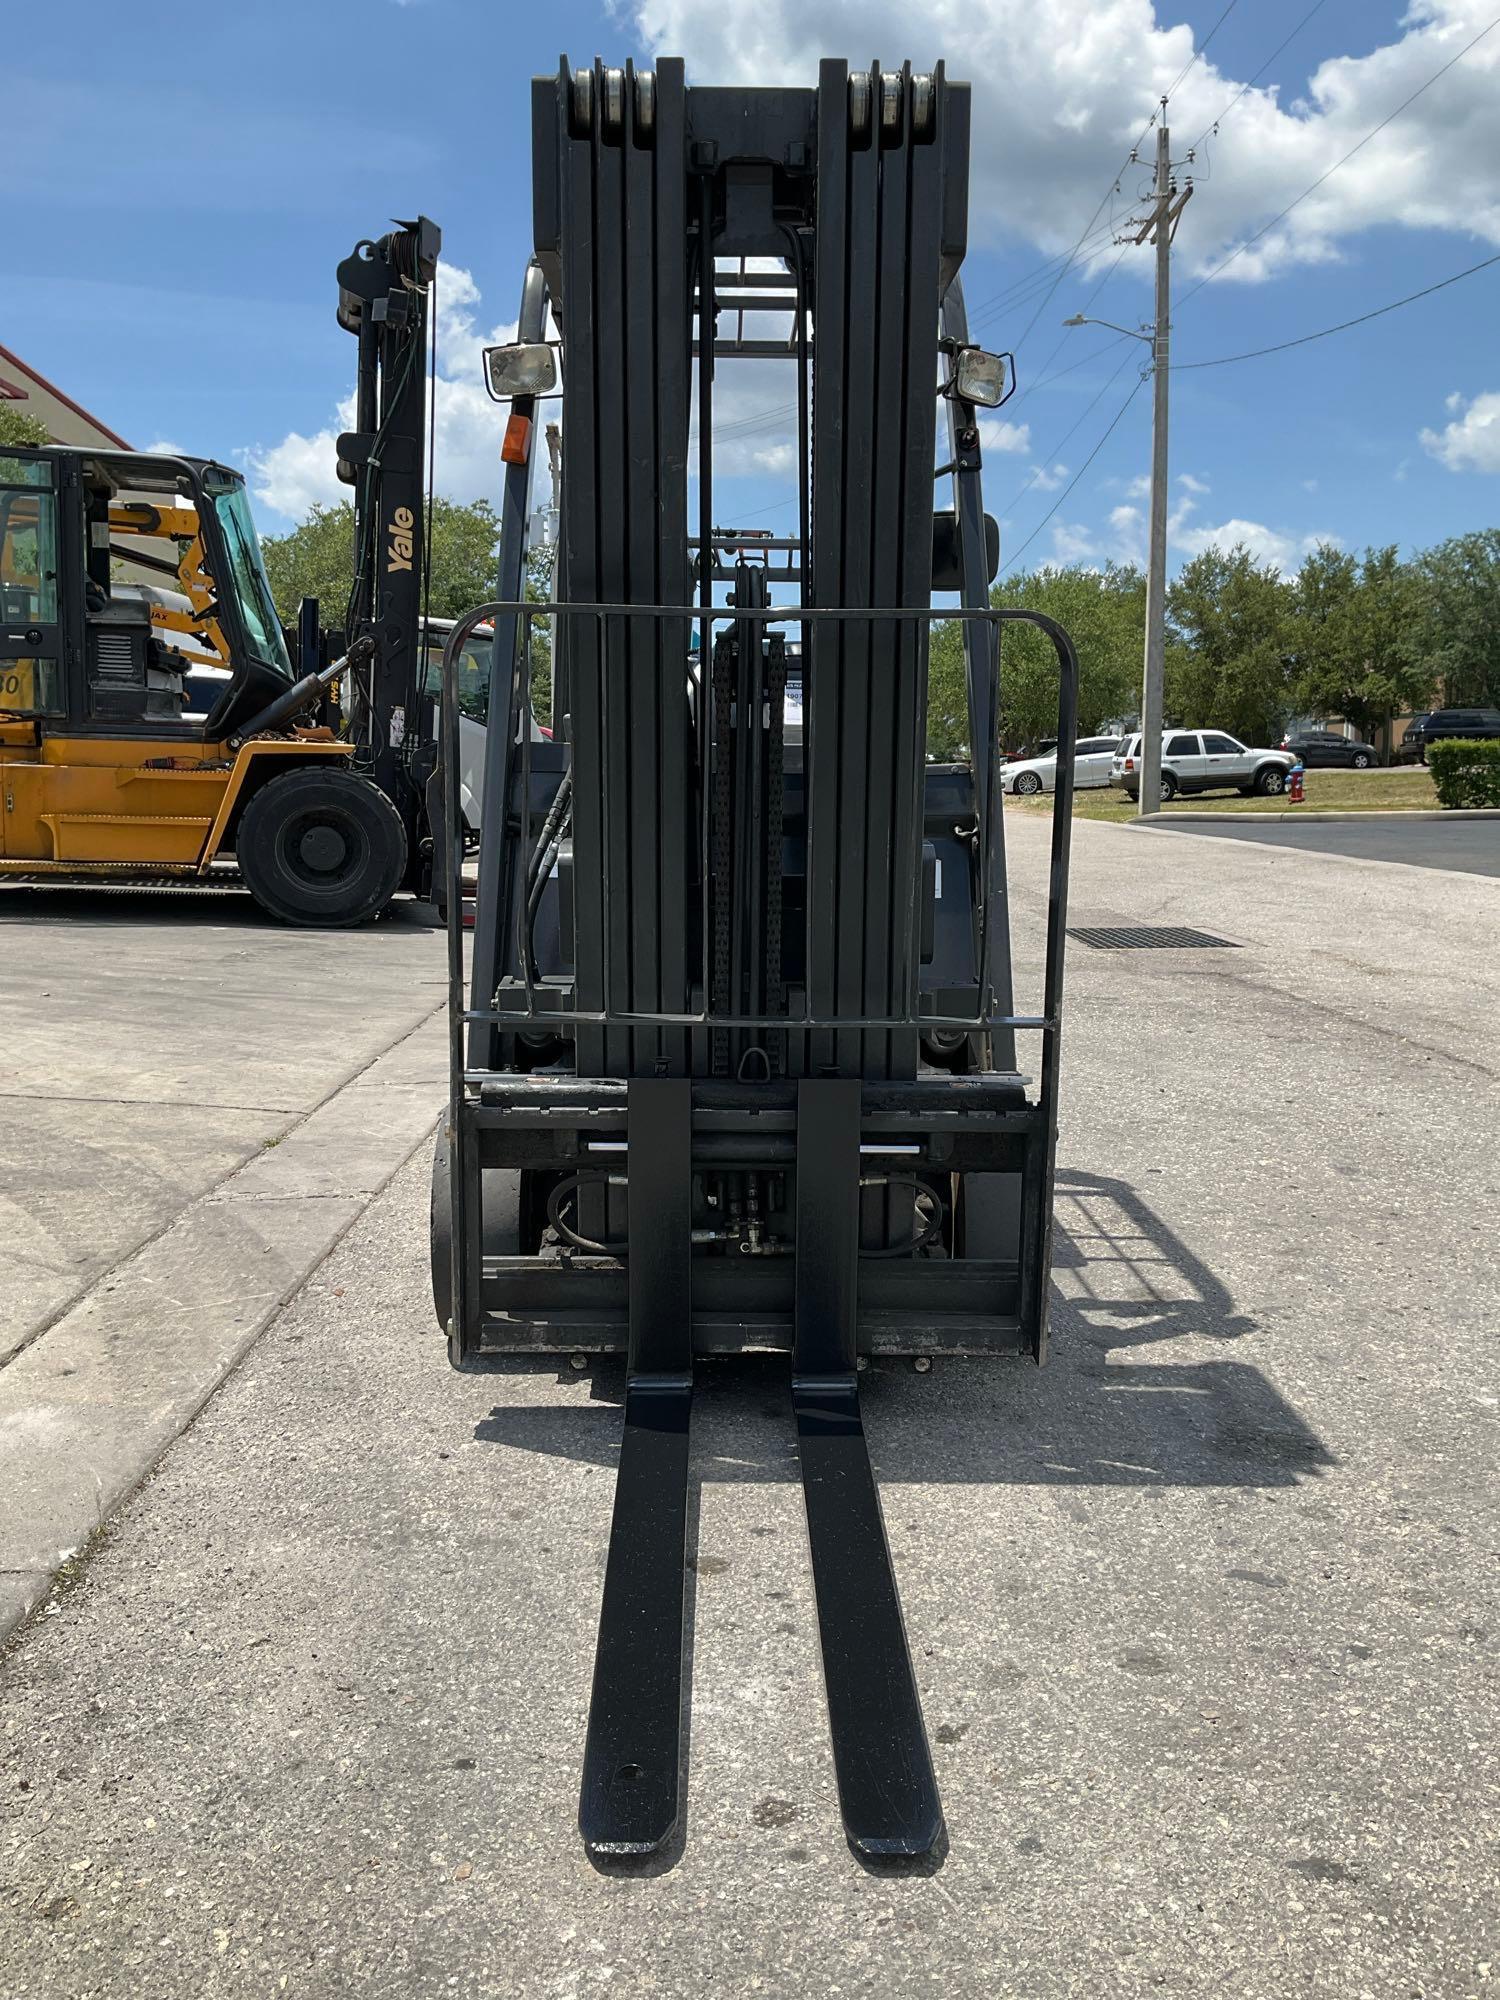 NISSAN 40 FORKLIFT MODEL G1N1L20V, ELECTRIC, APPROX MAX CAPACITY 4,000 LBS, MAX HEIGHT 240in, TILT,